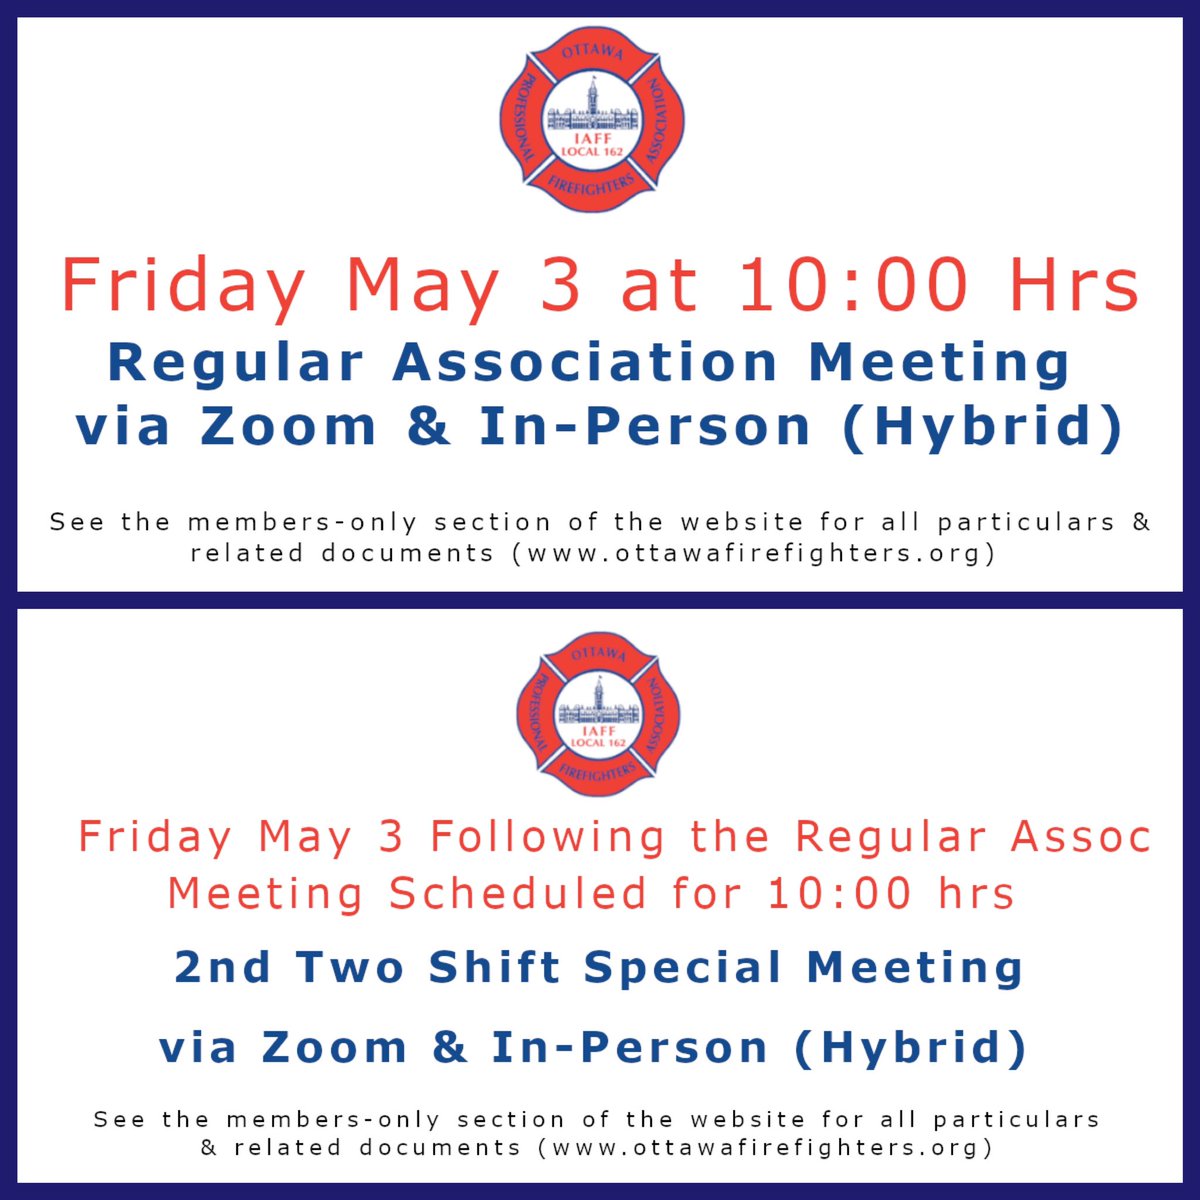 A reminder to our members about Friday's Regular Association Meeting & 2nd Two-Shift Special Meeting. These meetings will take place via Zoom & in-person (hybrid). See the members-only section of the Association website for all particulars & related documents.